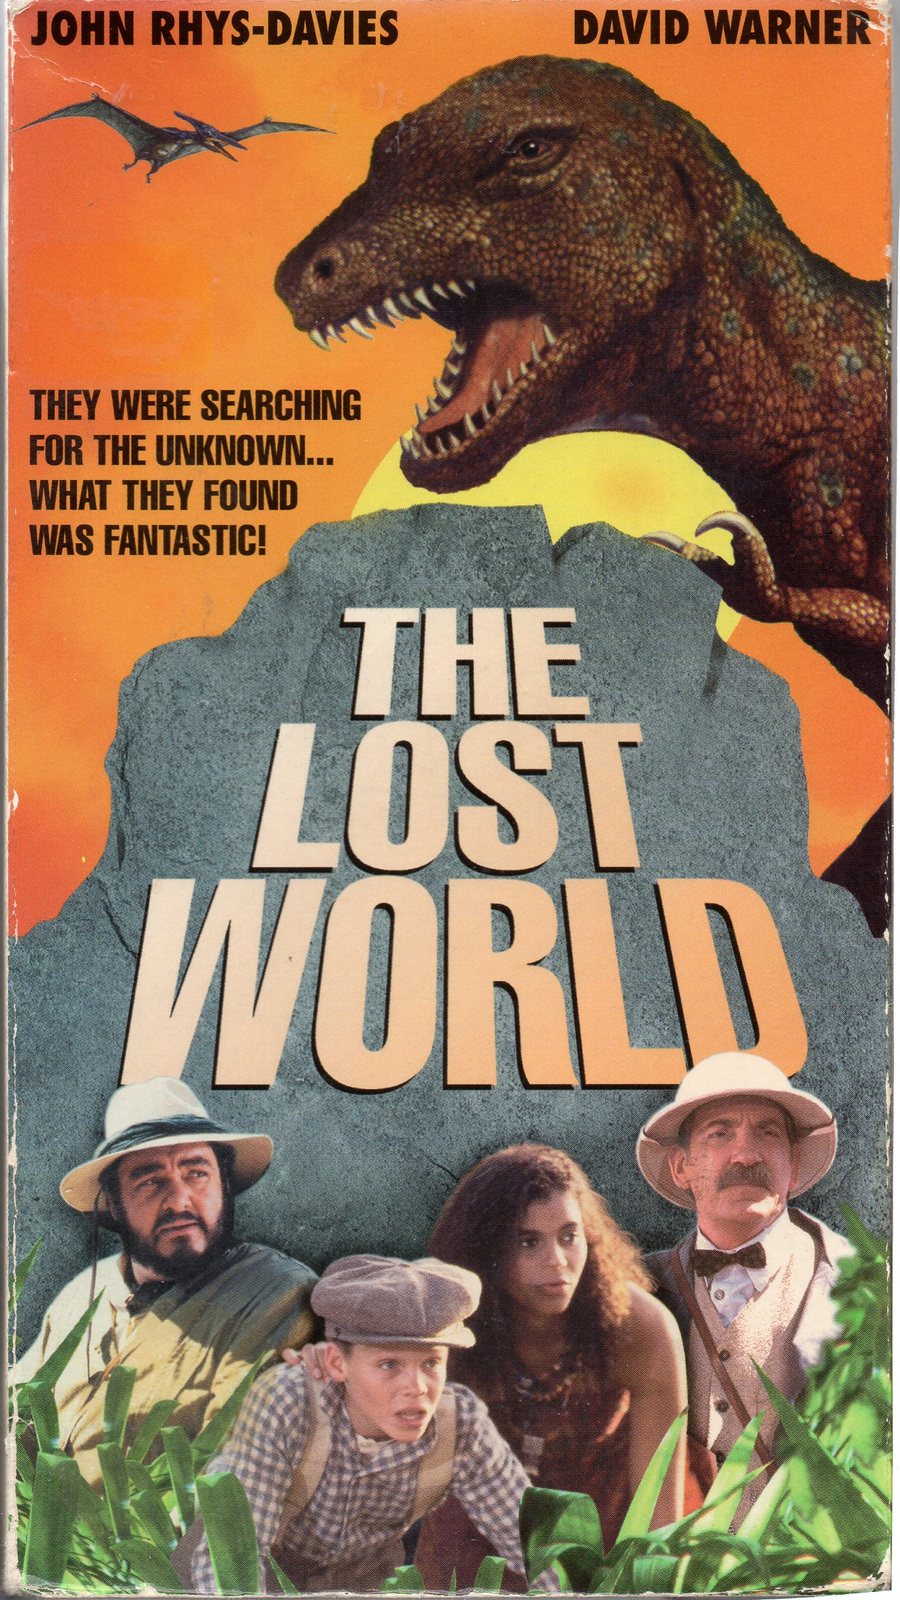 Primary image for LOST WORLD (vhs) Sir Arthur Conan Doyle writer of John Carter, deleted title